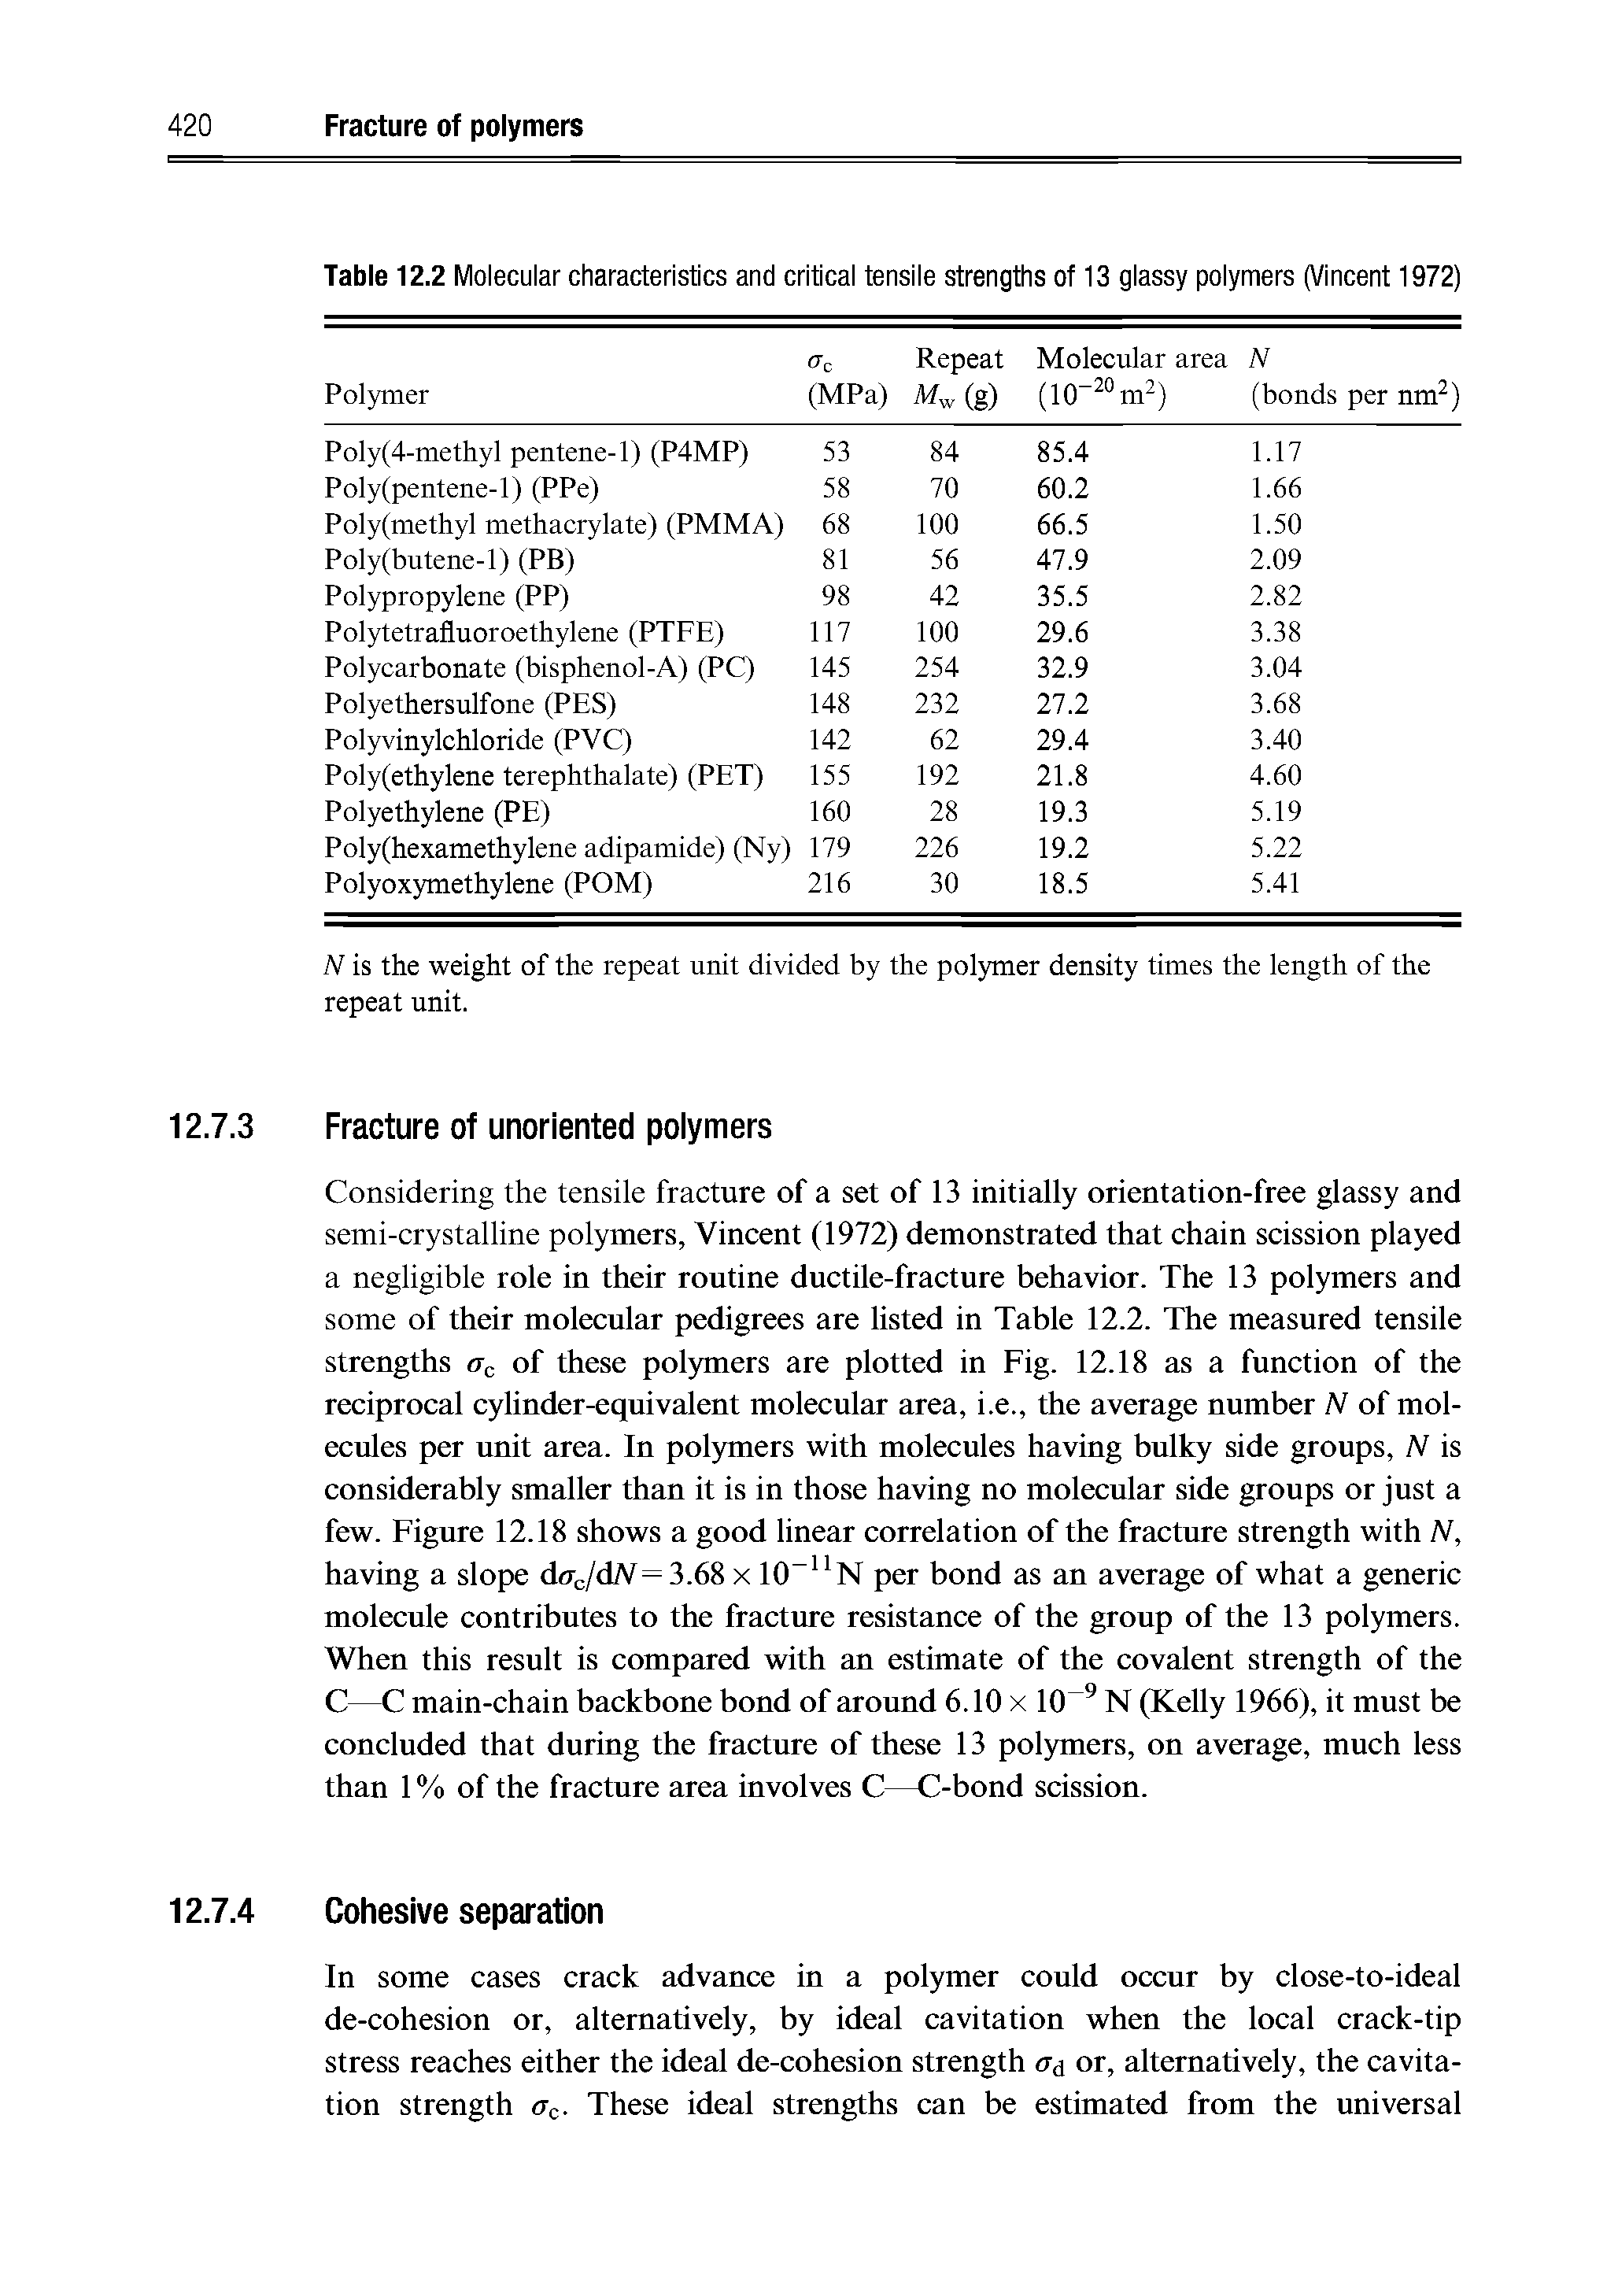 Table 12.2 Molecular characteristics and critical tensile strengths of 13 glassy polymers (Vincent 1972)...